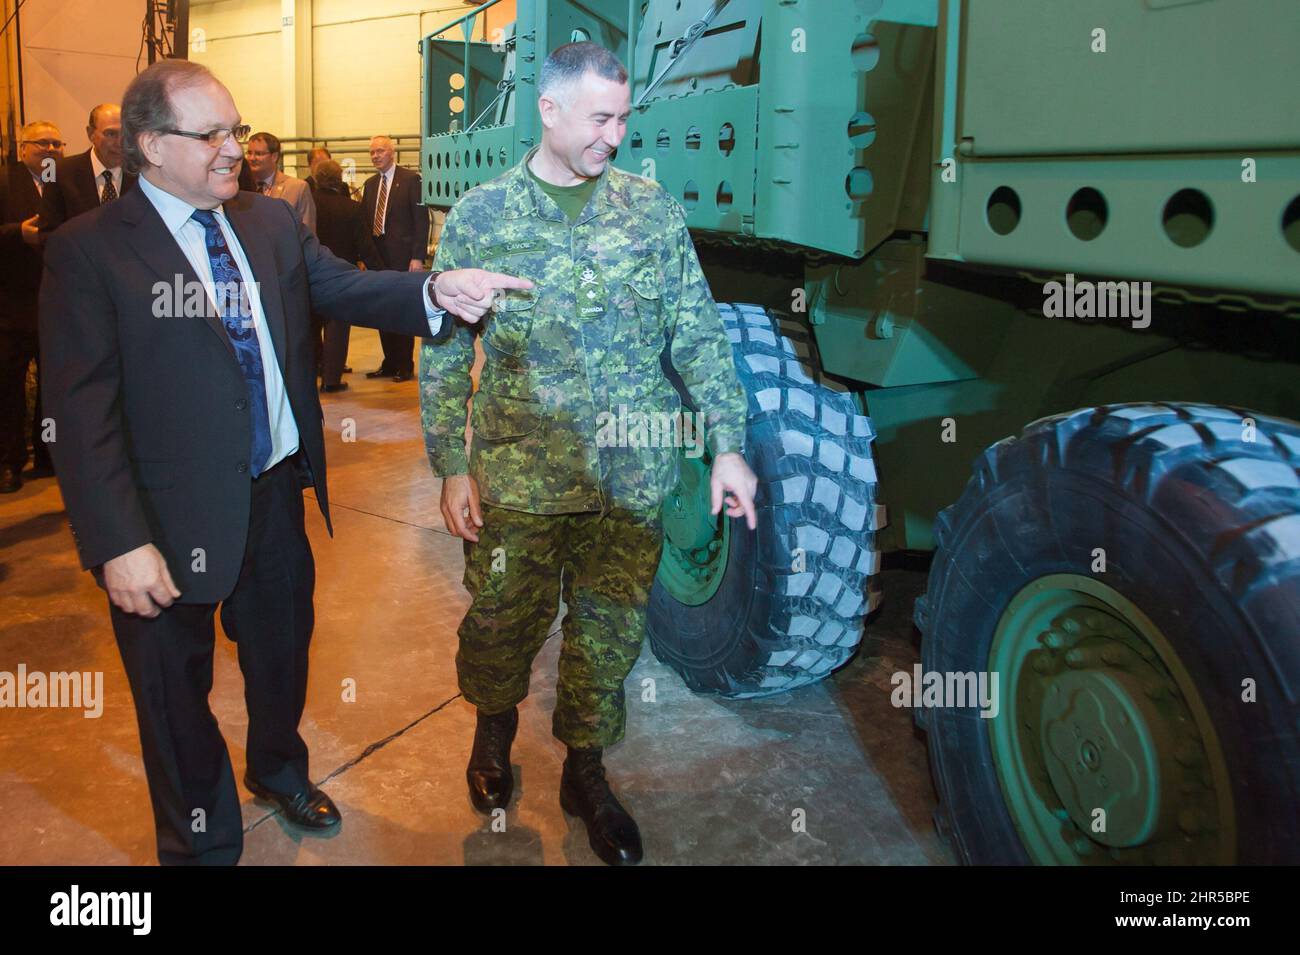 Bernard Valcourt, Associate Minister of National Defence, inspects the outside of the new upgraded Light Armoured Vehicle, along with Brigadier General Omer Lavoie, at a news conference for the unveiling of the new vehicle at a General Dynamics facility in London, Ont., on Thursday, January 24, 2012. THE CANADIAN PRESS/Mark Spowart Stock Photo